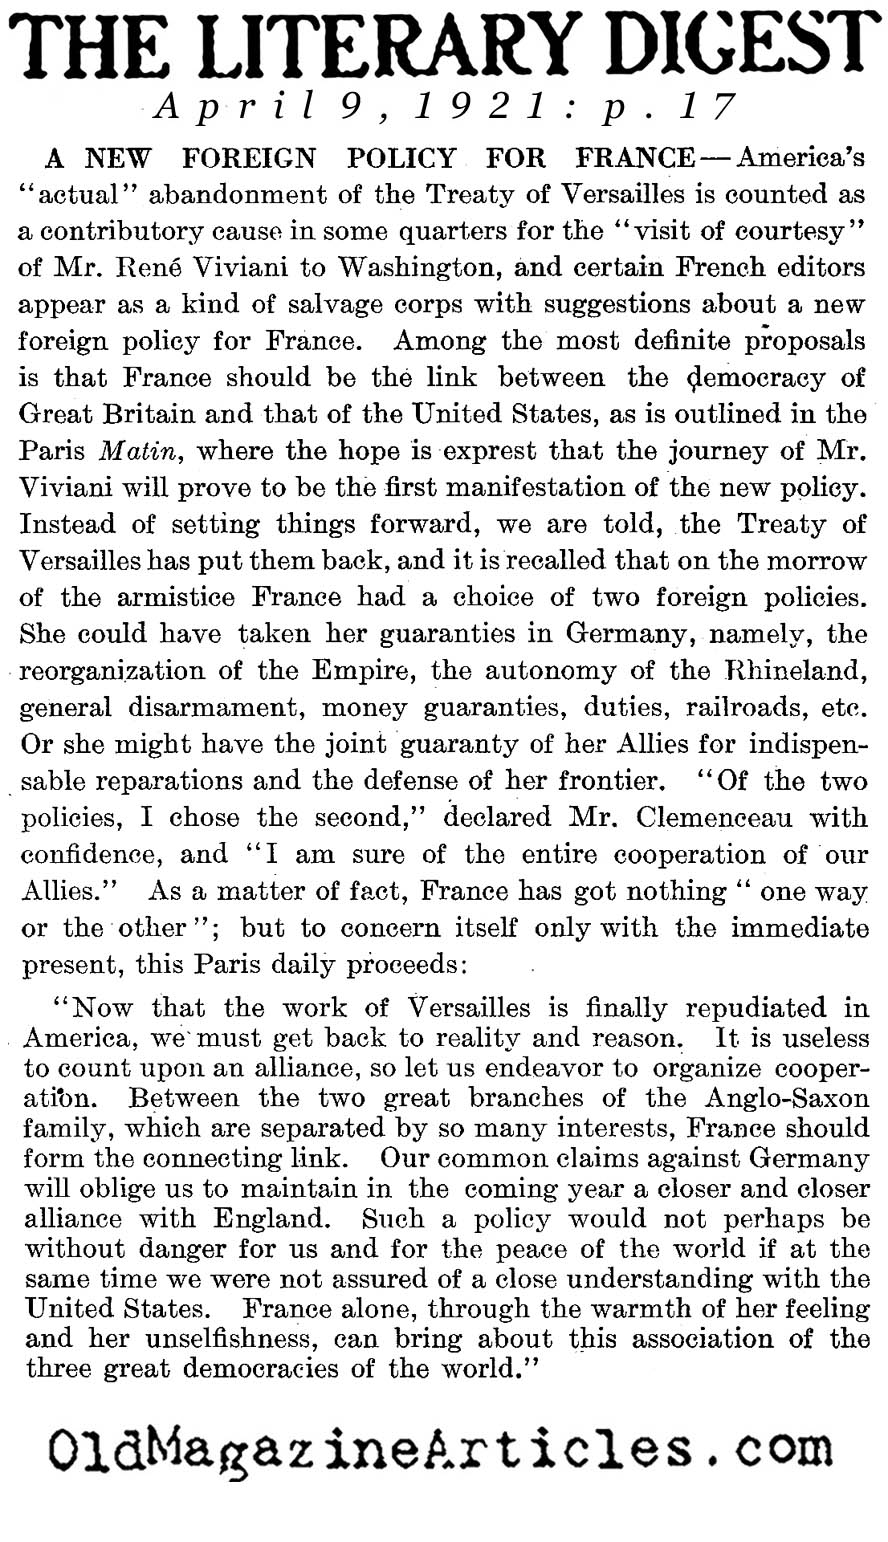 Britain and France Draw Closer (Literary Digest, 1921)